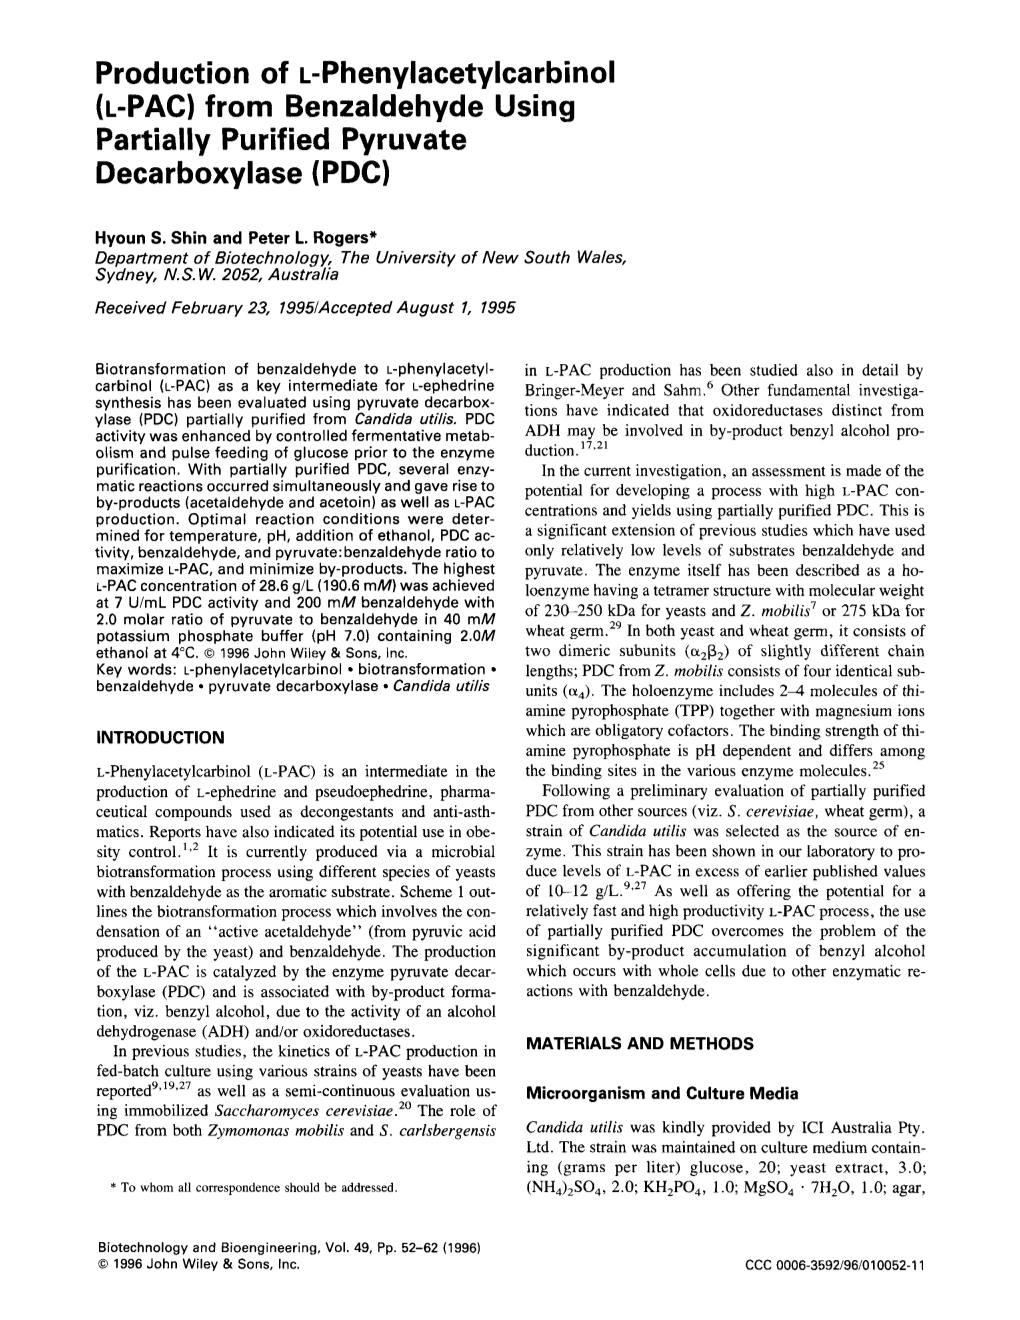 L-PAC) from Benzaldehyde Using Partially Purified Pyruvate Oecarboxylase (PDC